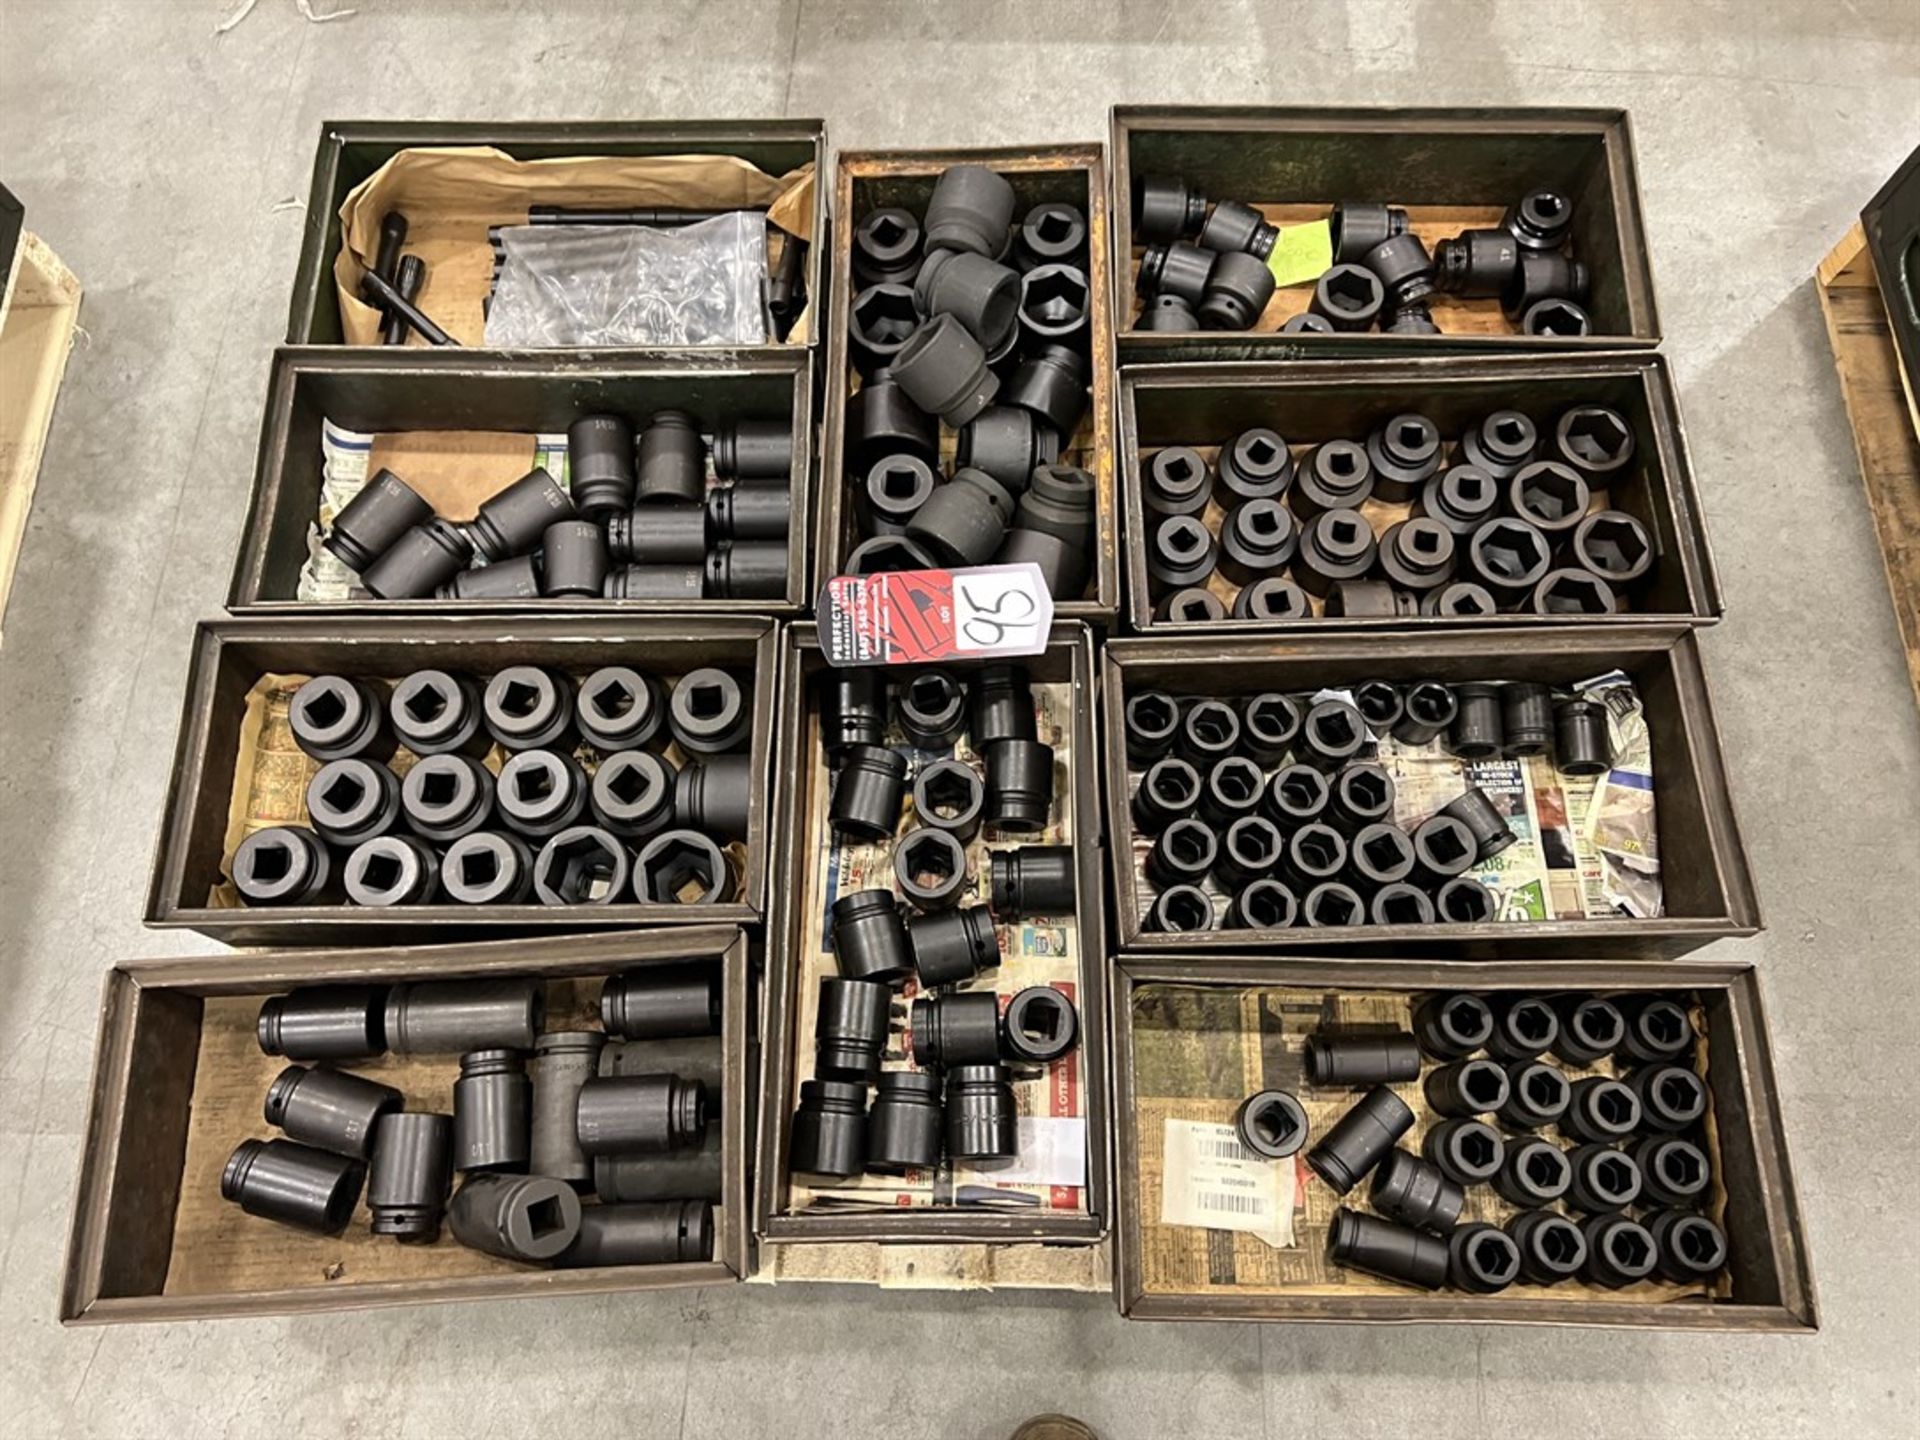 Pallet of 1/2", 3/4" and 1" Drive Impact Sockets up to 50mm and 2-1/16"